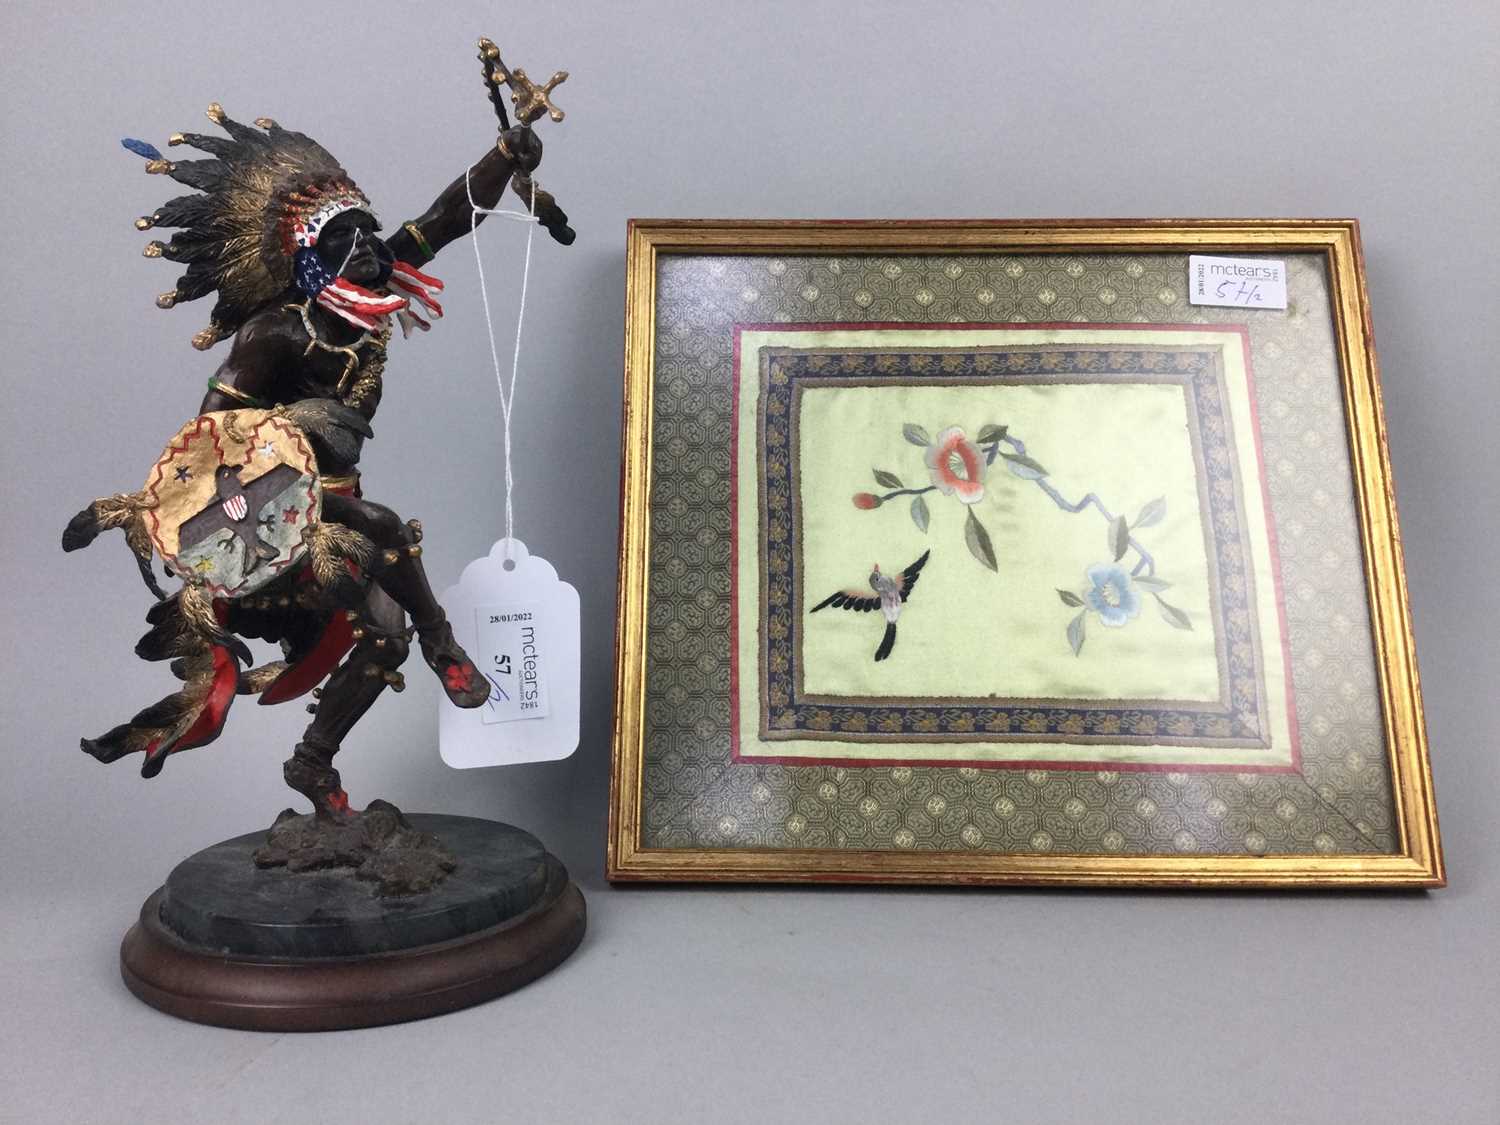 Lot 57 - A BRONZED METAL FIGURE OF A NATIVE AMERICAN, ALONG WITH A CHINESE EMBROIDERY